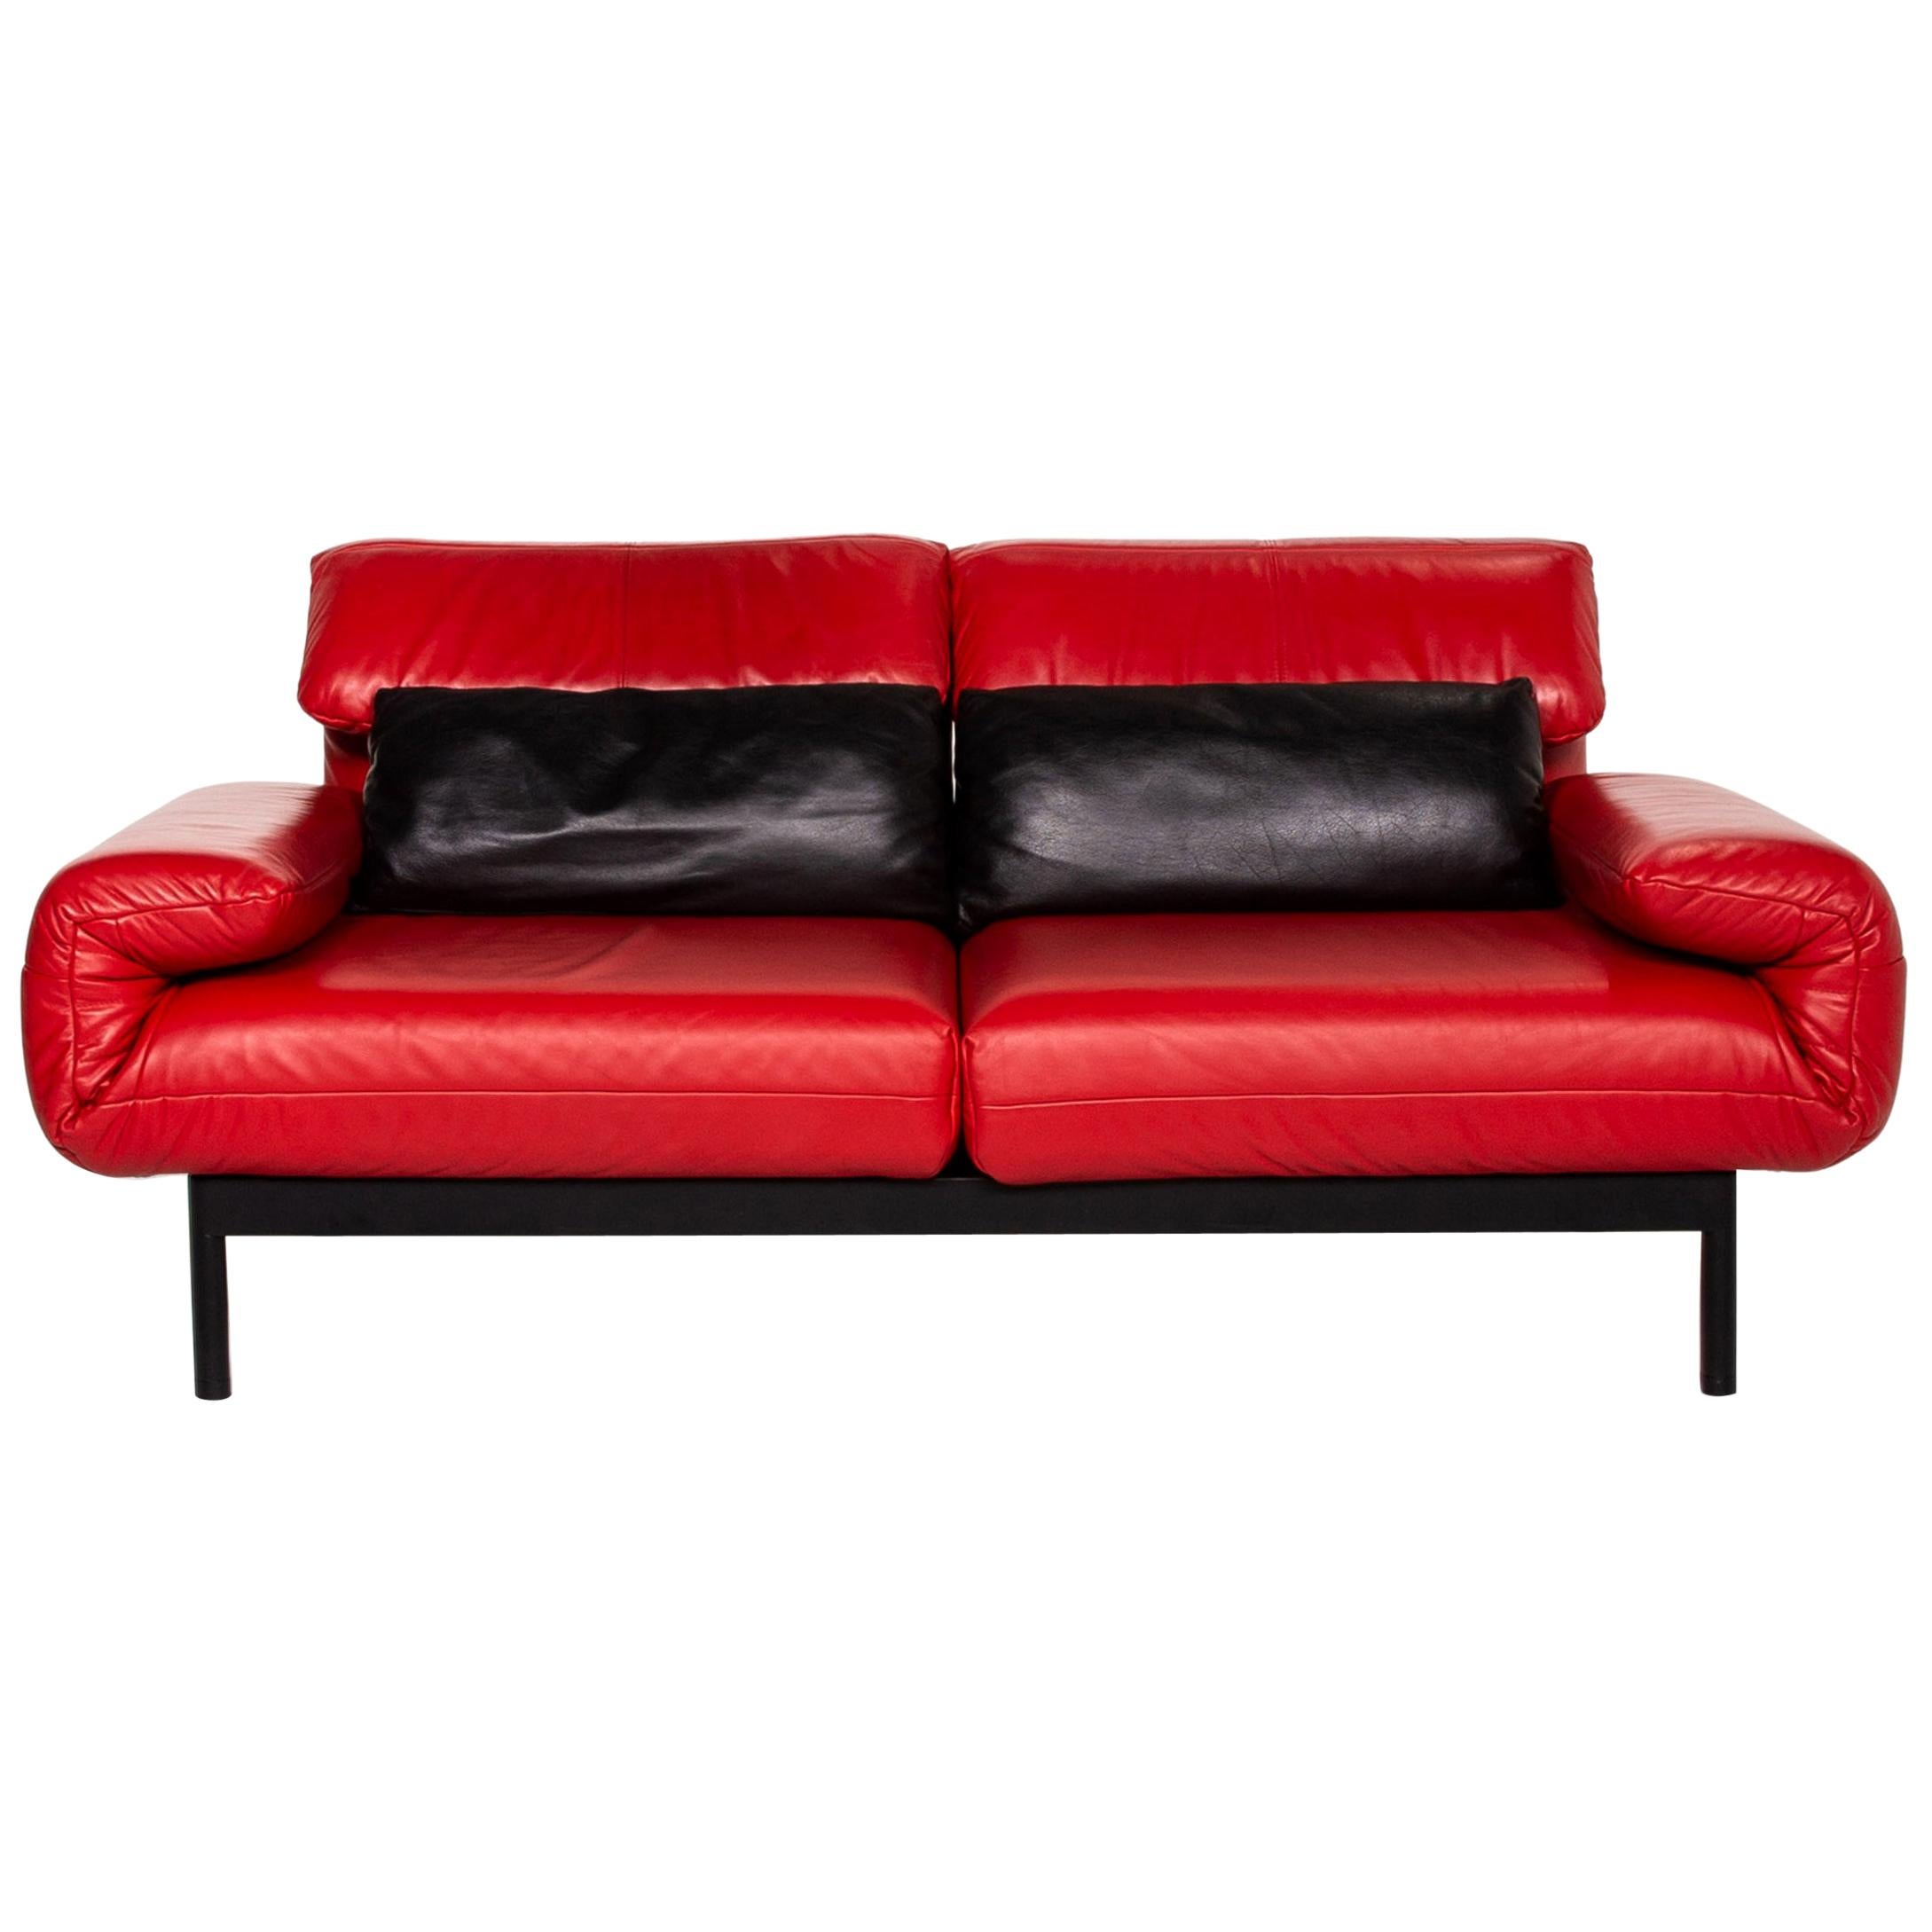 Rolf Benz Plura Leather Sofa Red Black Two-Seat Function Relax Function Couch For Sale